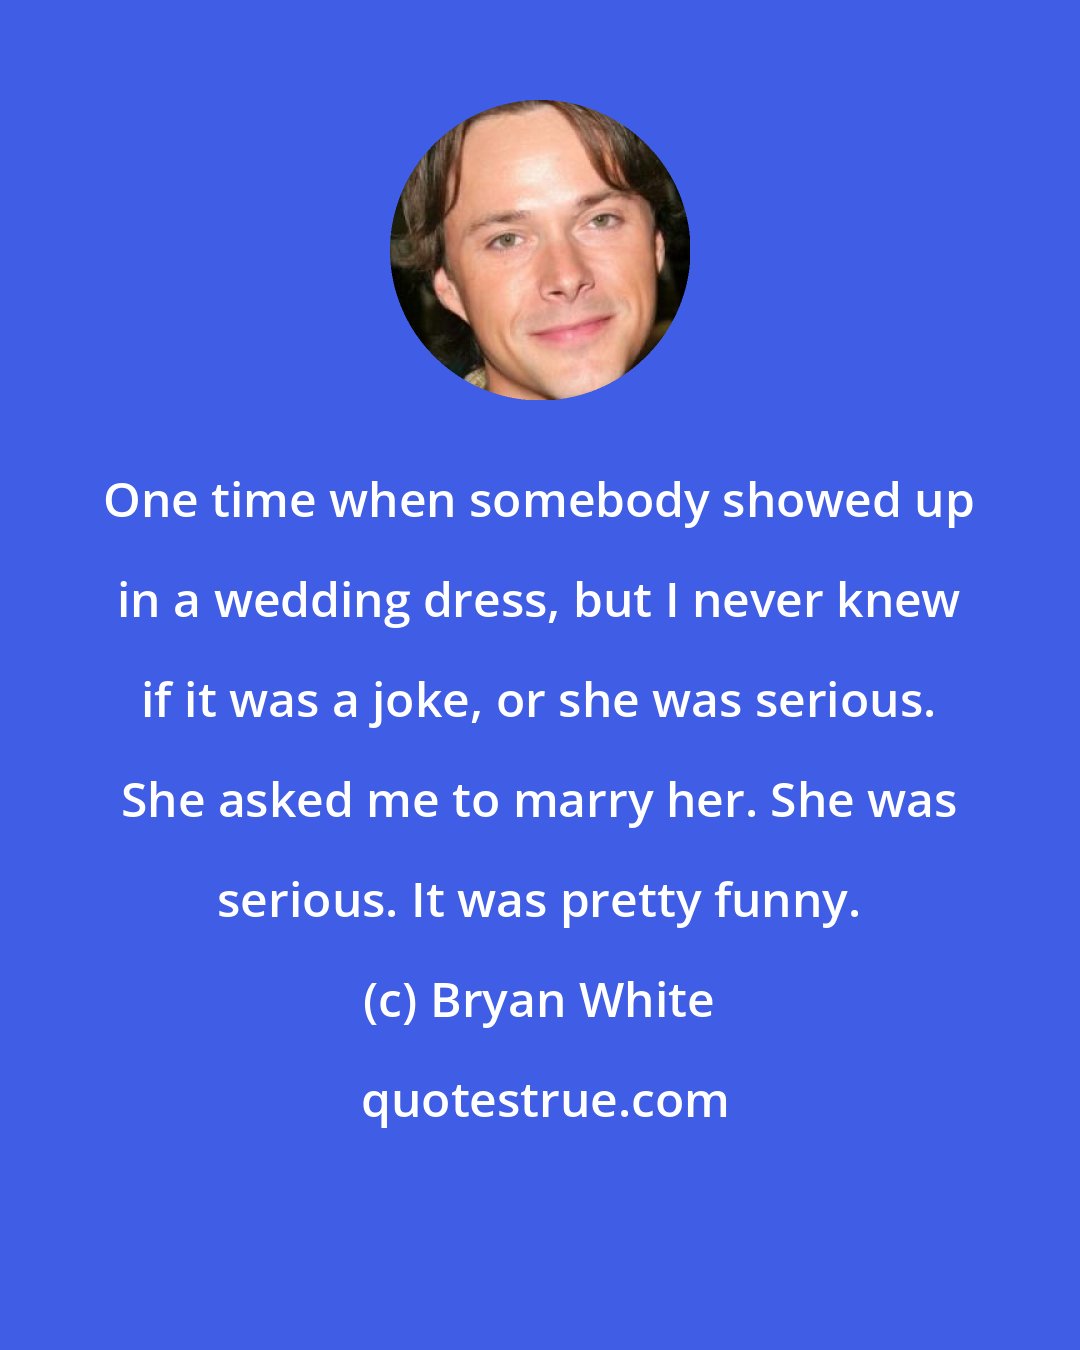 Bryan White: One time when somebody showed up in a wedding dress, but I never knew if it was a joke, or she was serious. She asked me to marry her. She was serious. It was pretty funny.